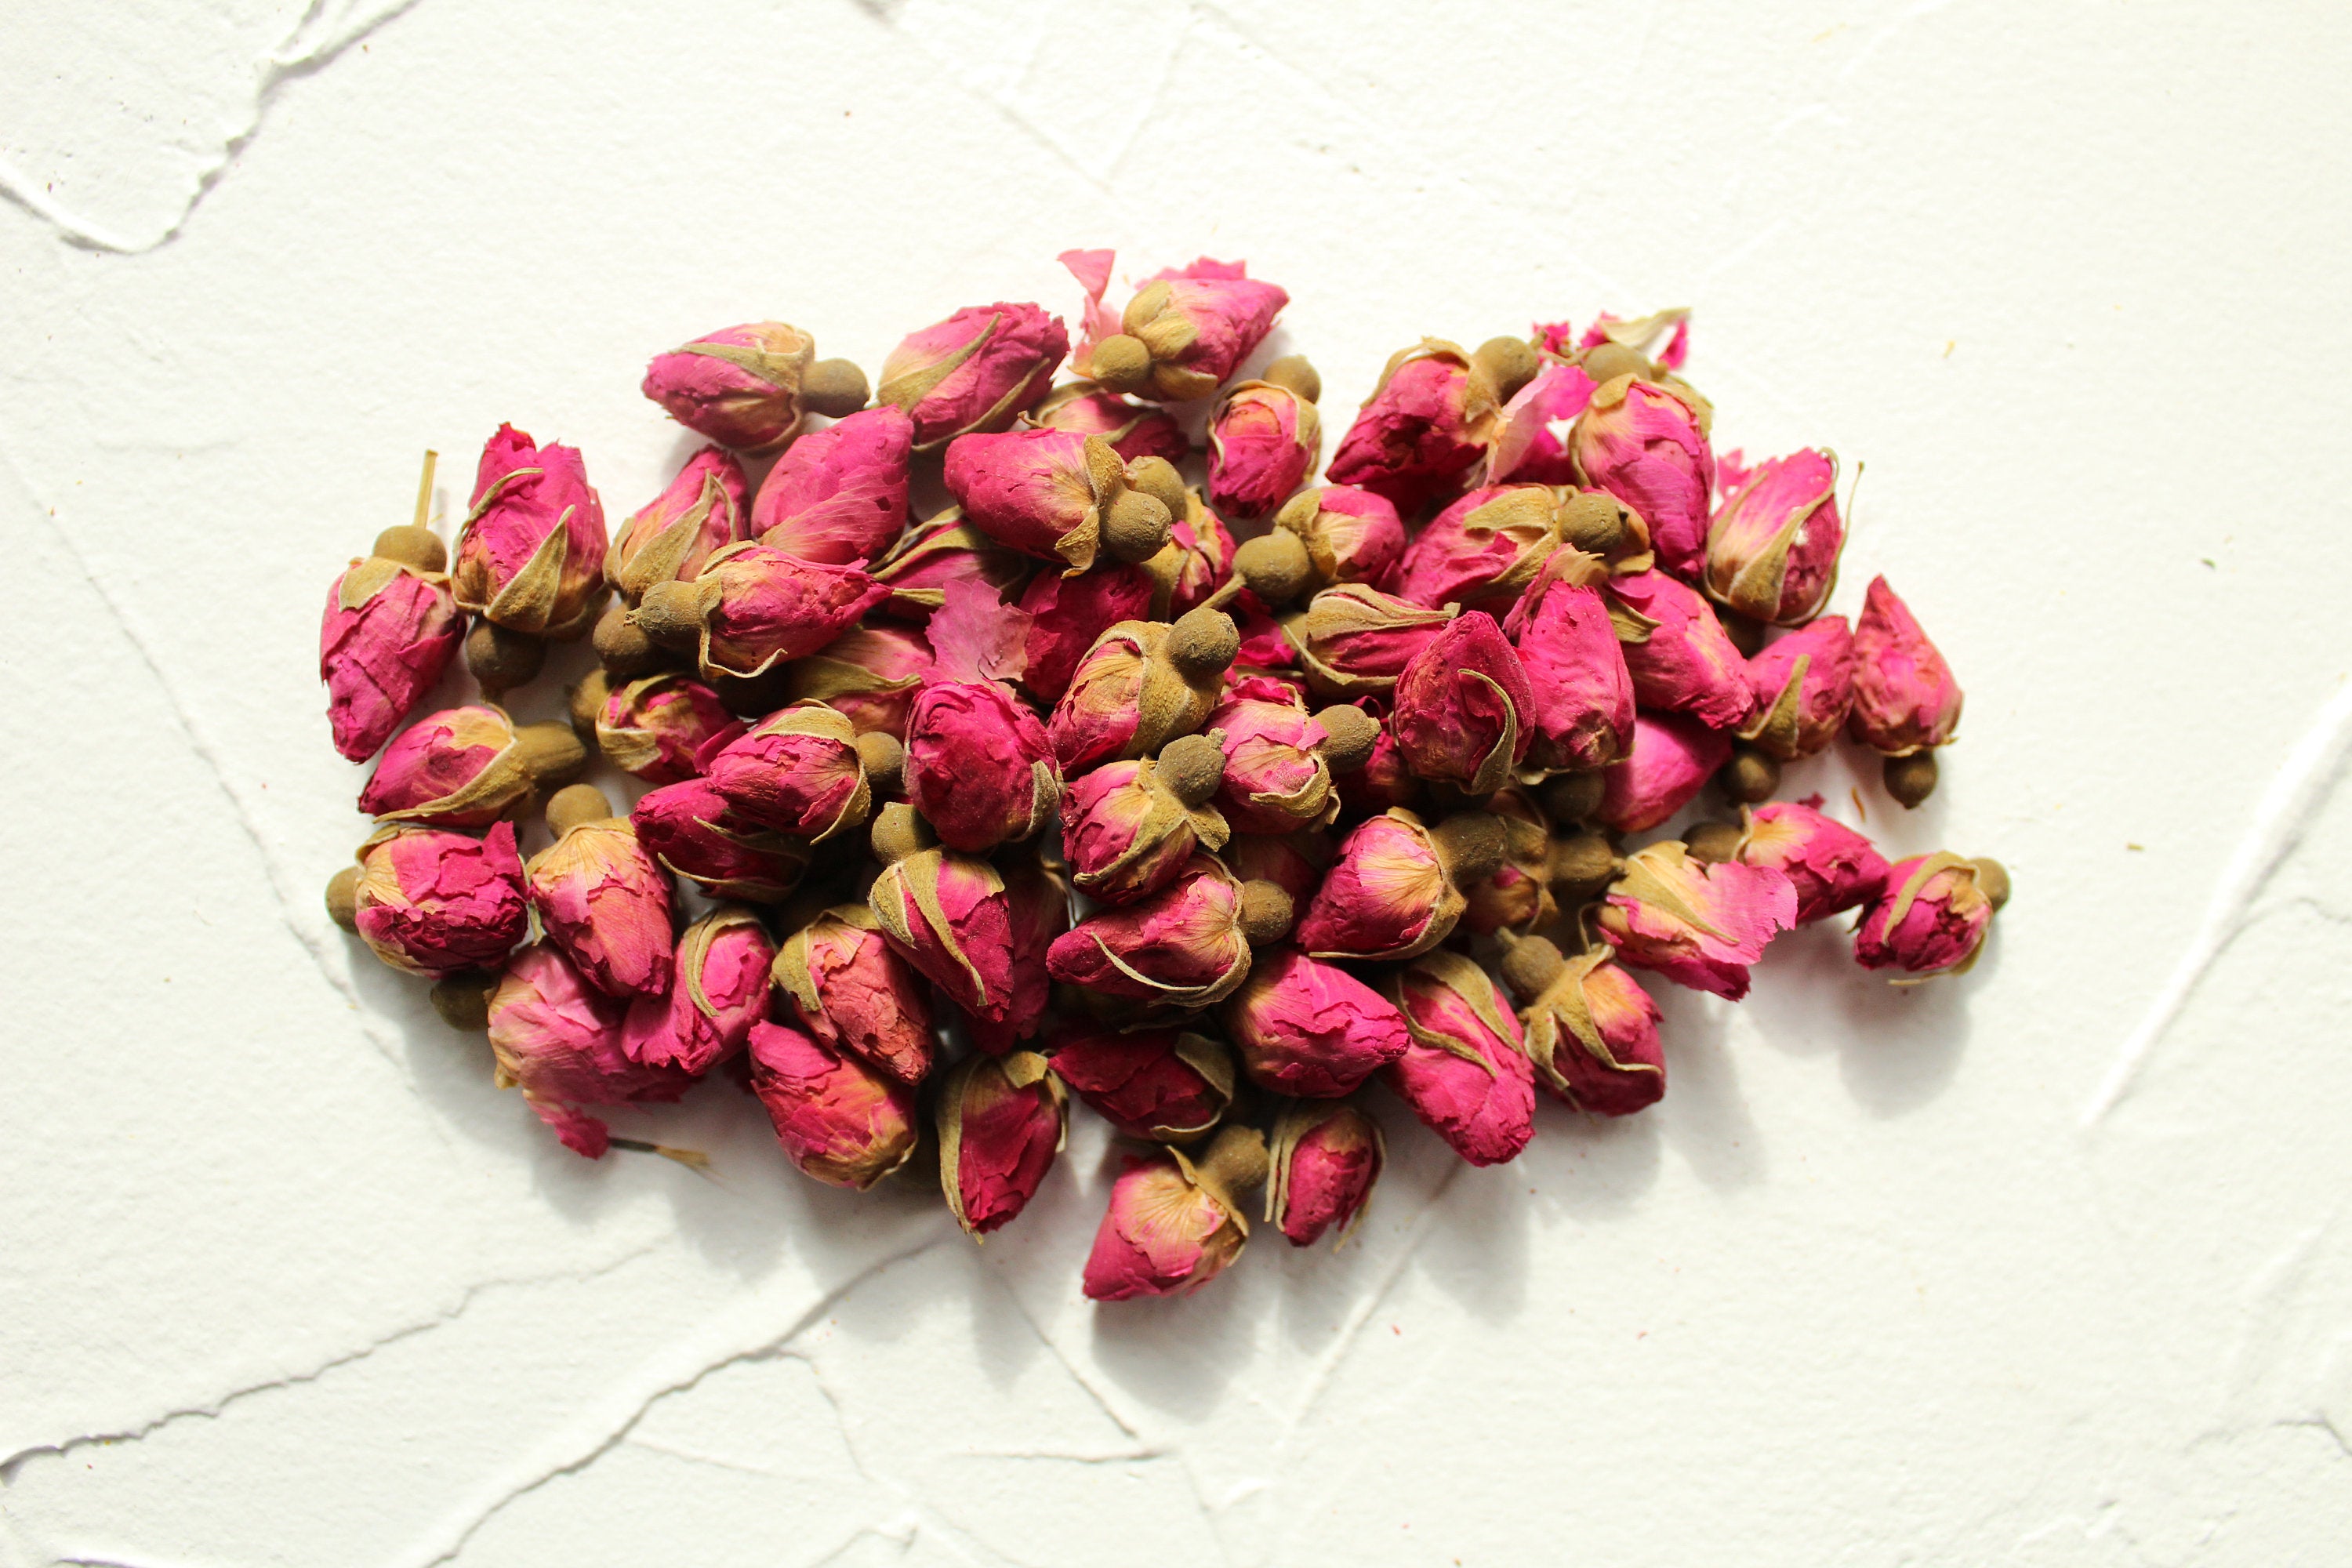 250 grams of Red rose buds, High Quality, Natural, Organic, Biodegraddable, Wedding, Craft, Edible, Confetti, Wedding toss, Wedding confetti